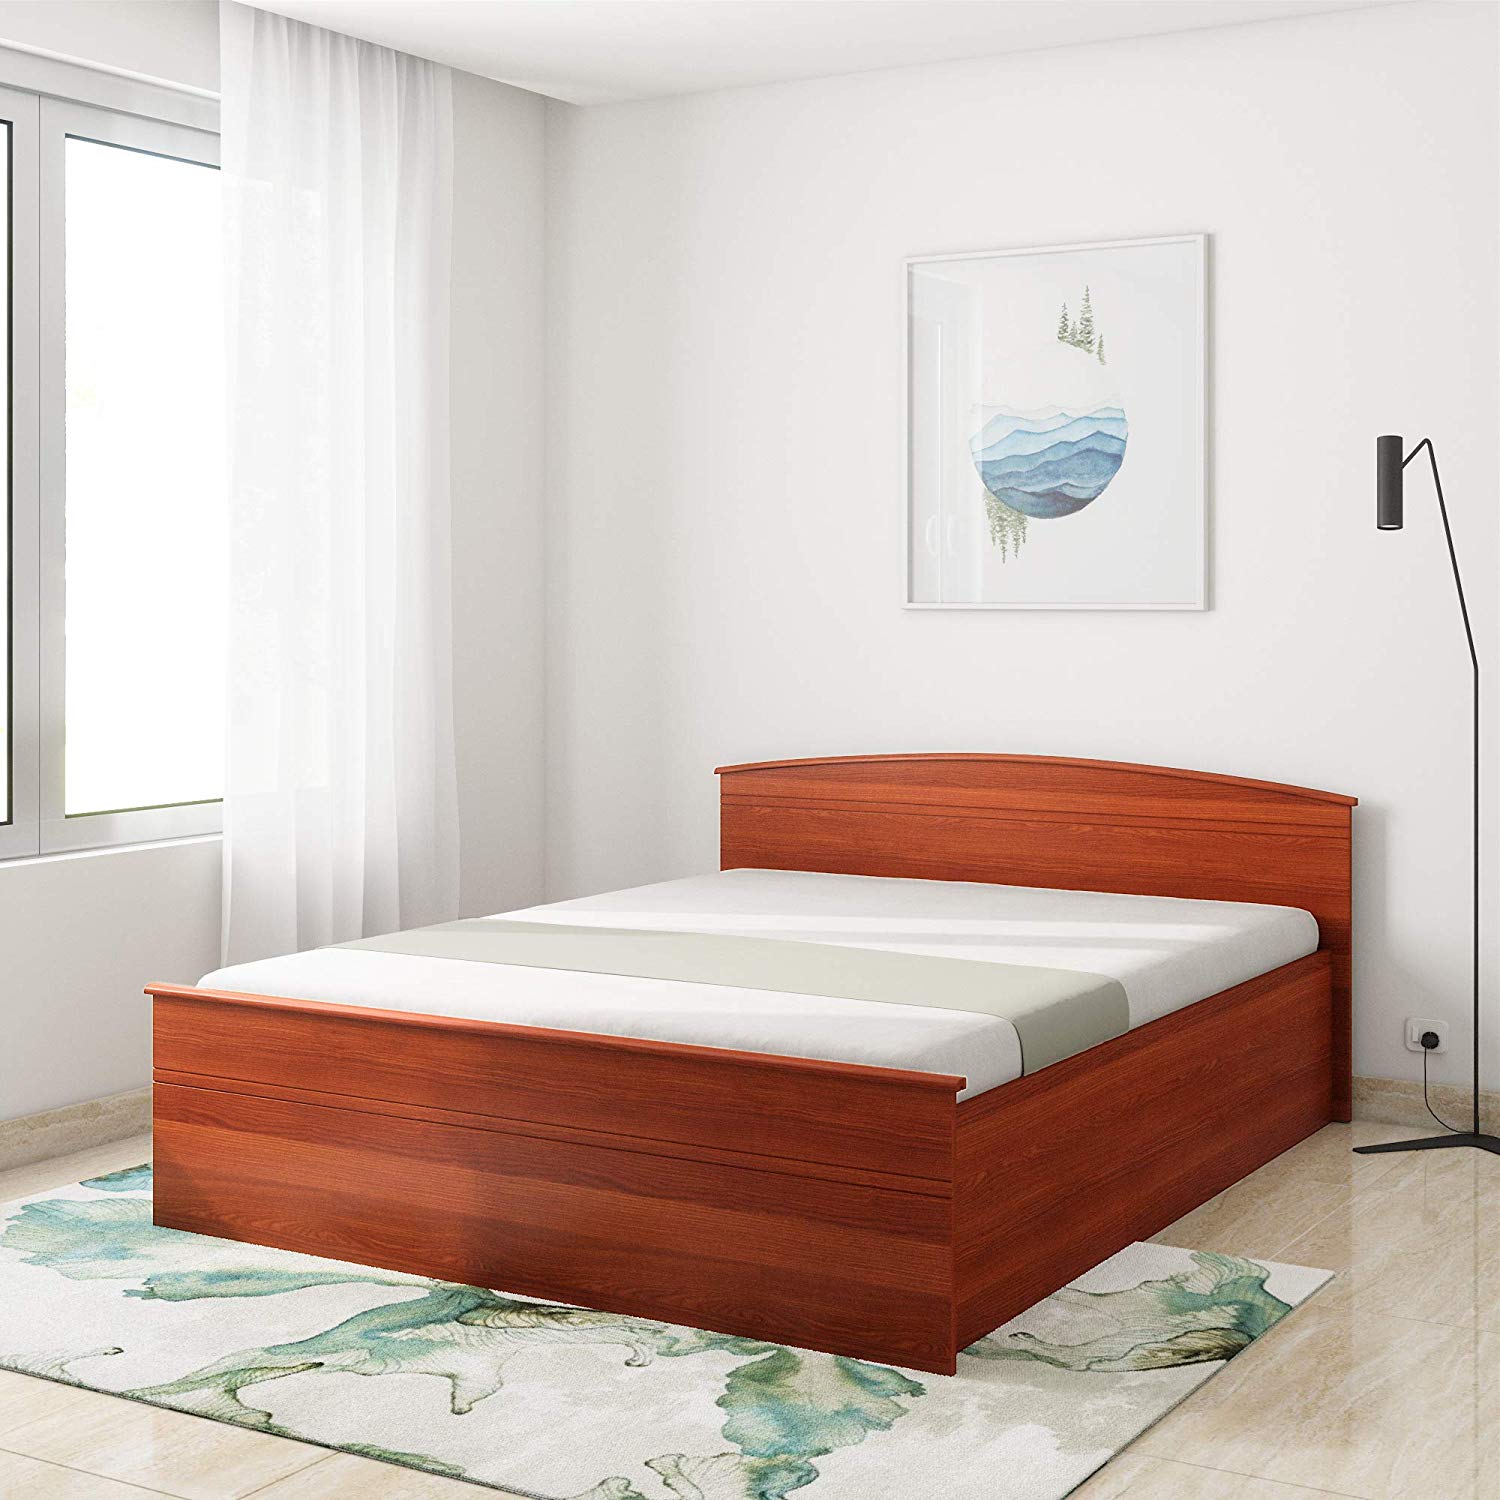 Solimo Optima Manual Box Storage Queen Bed (Sienna Cherry)